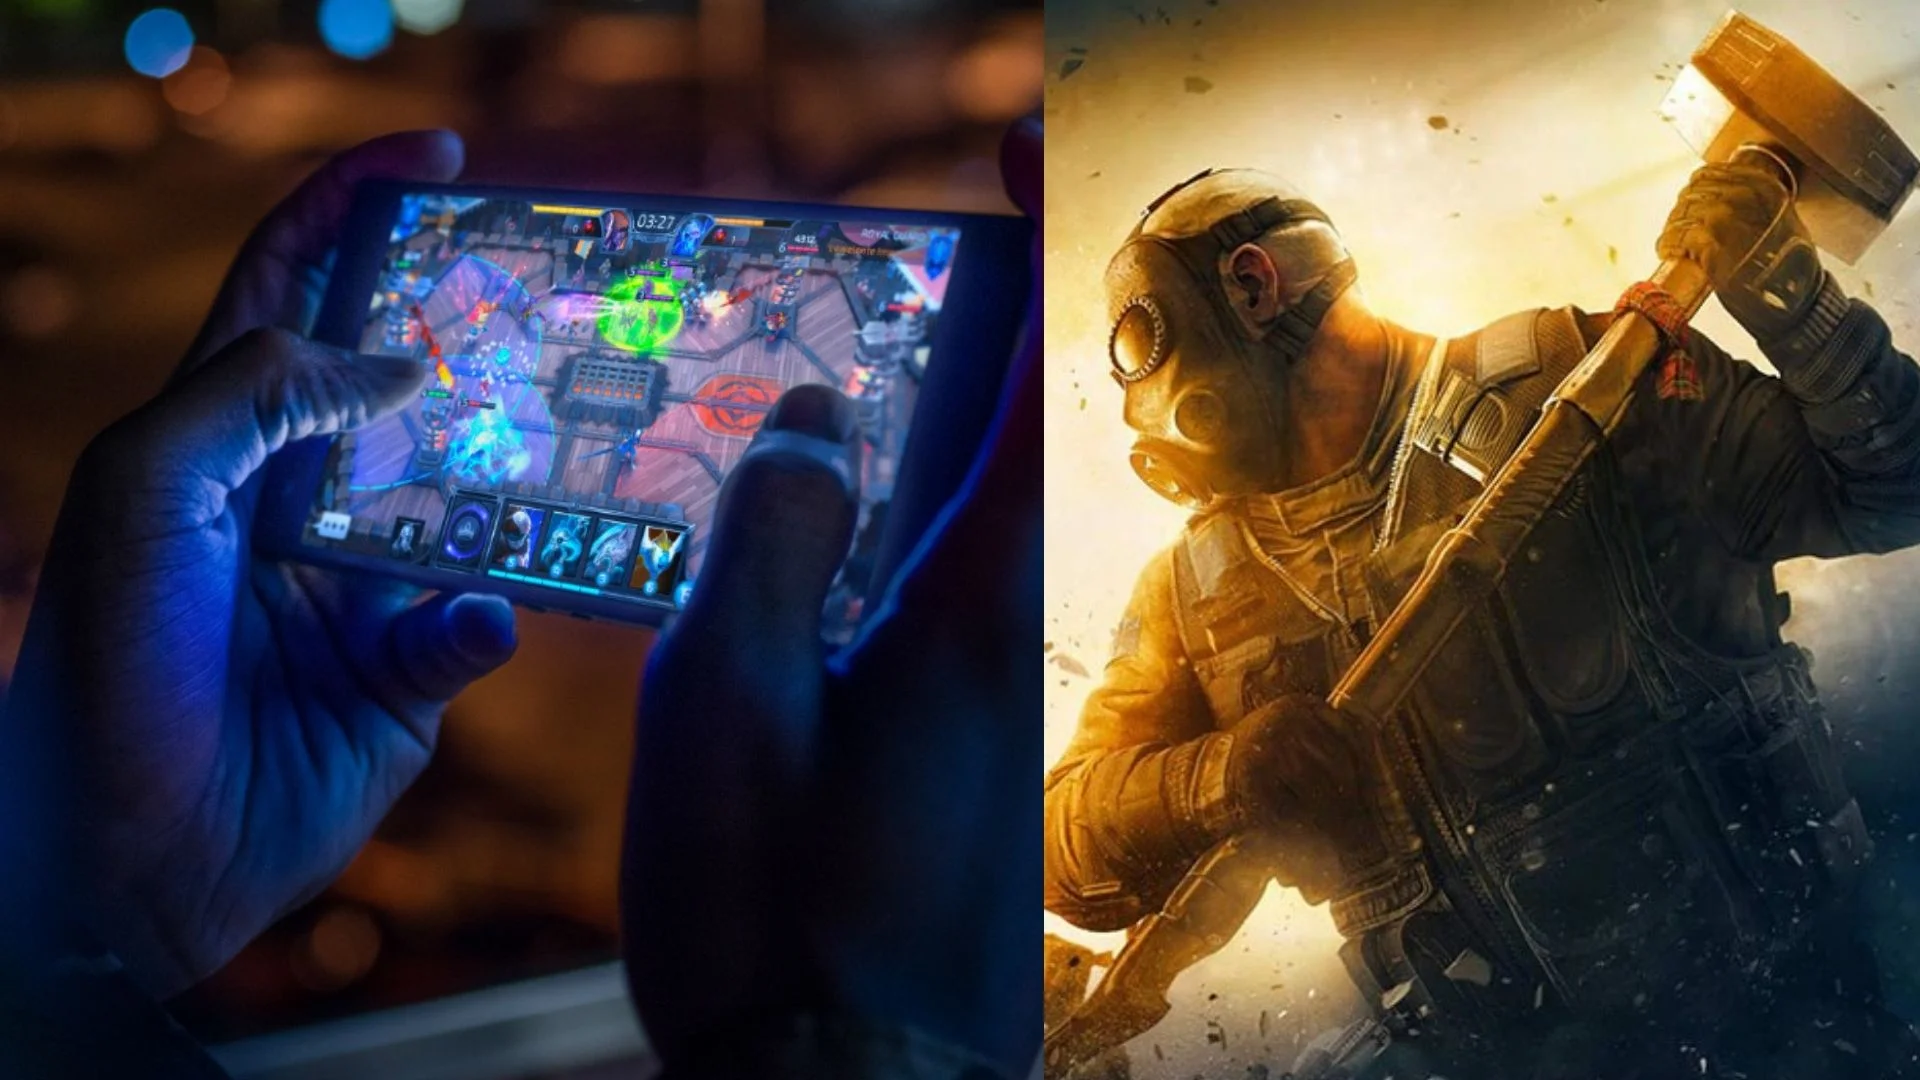 Rainbow Six Siege Mobile reportedly in development, to be revealed in April  - Gamepur